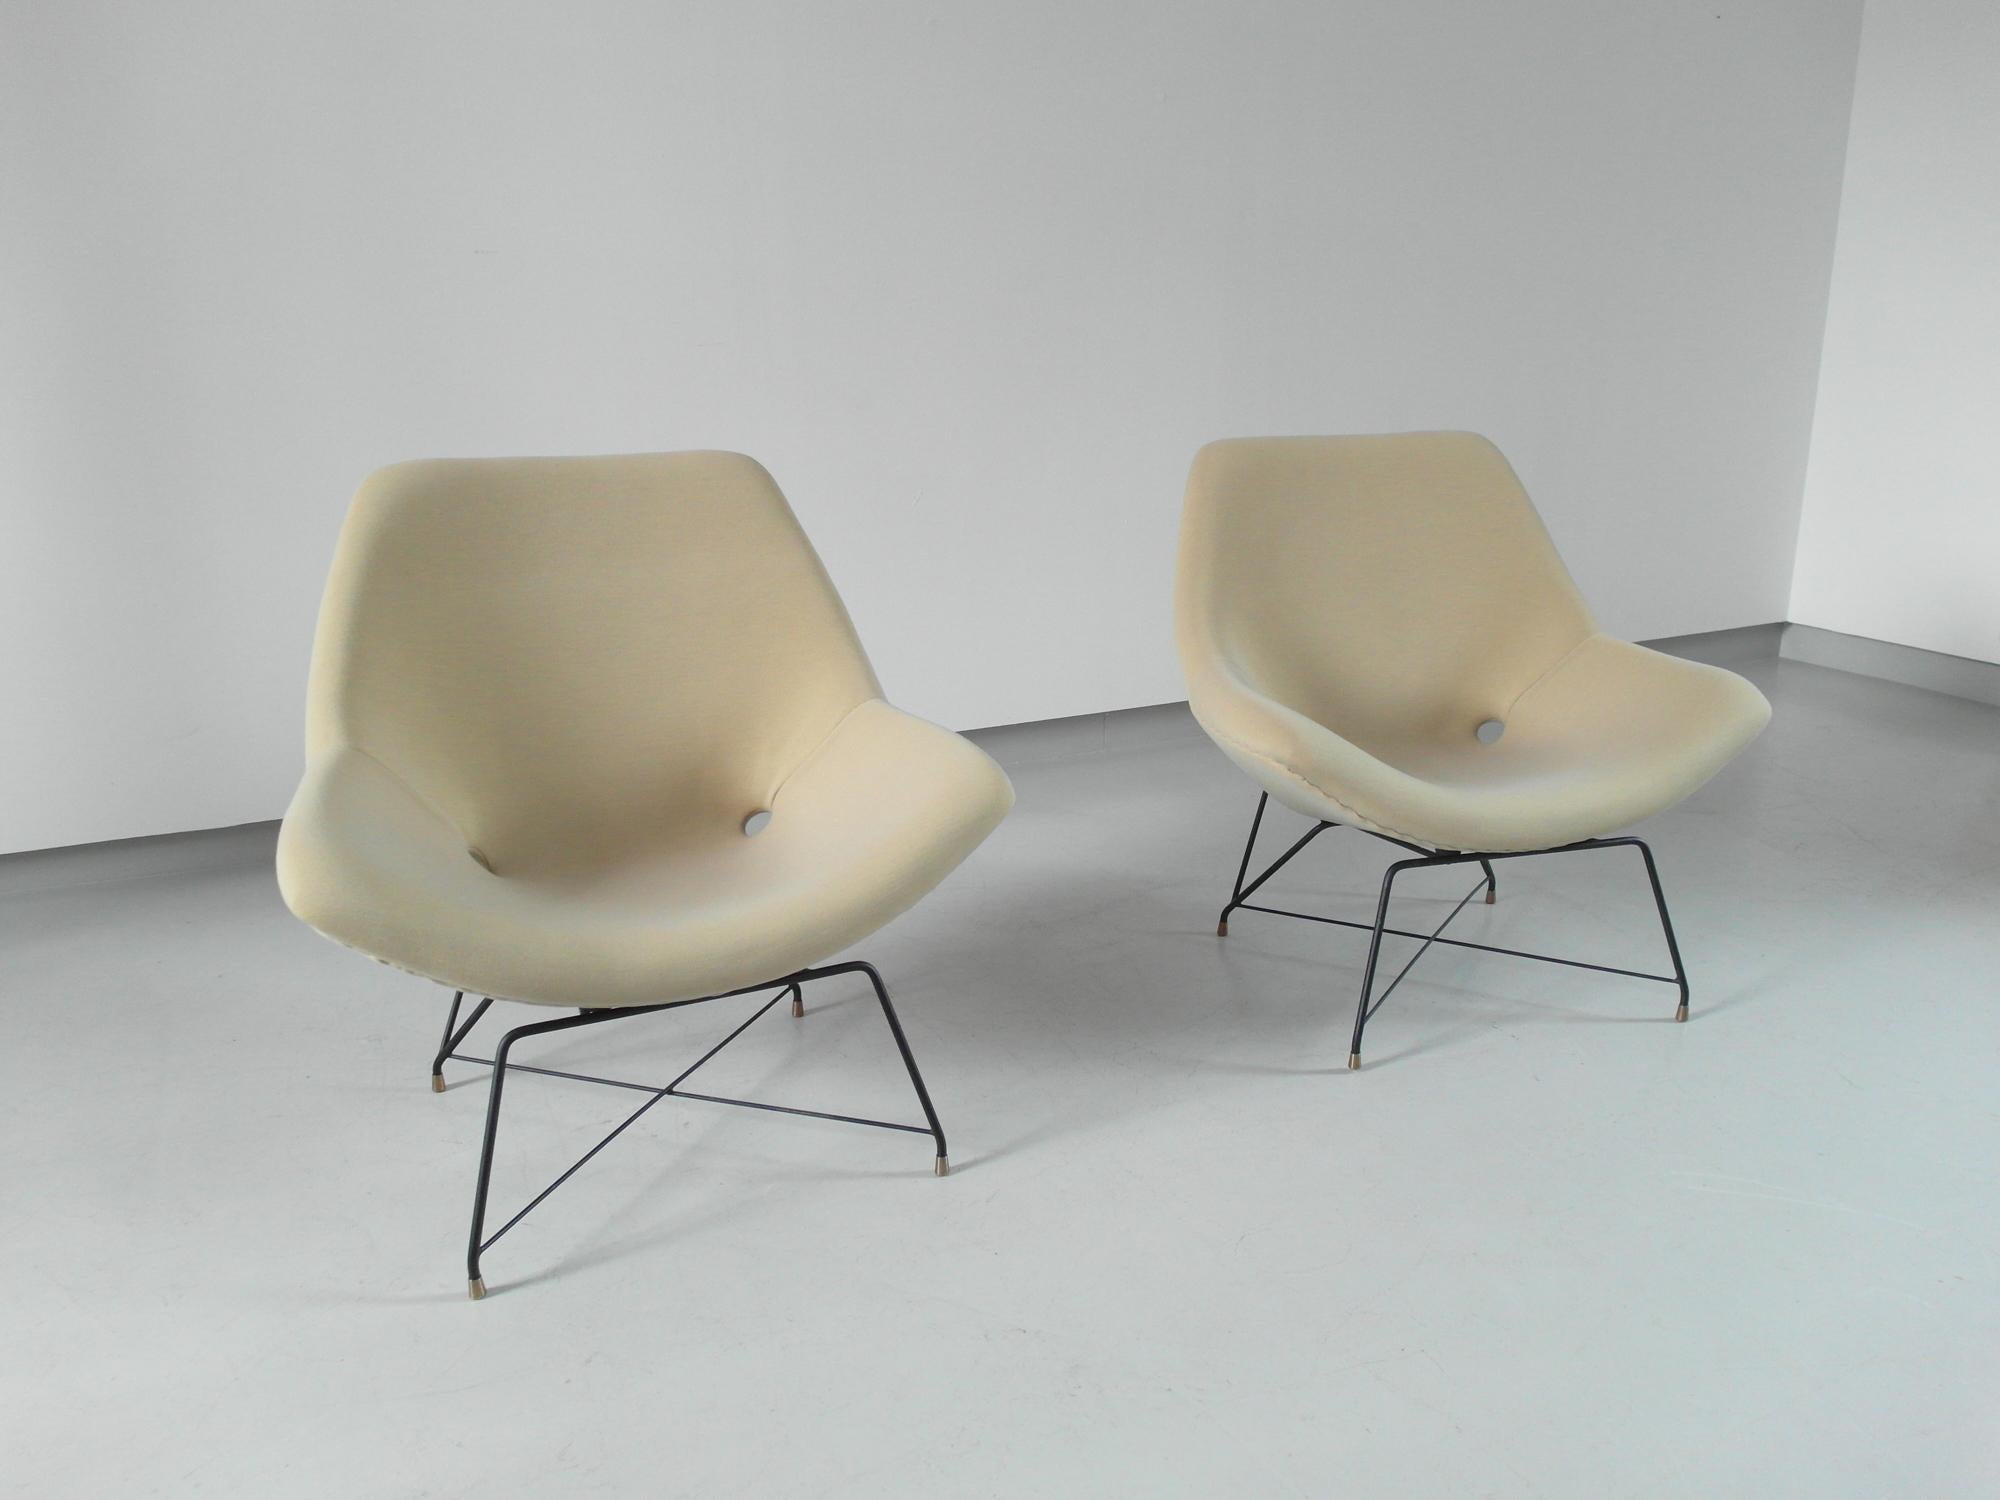 Italian Sculptural Pair of Lounge Chairs by Augusto Bozzi for Saporiti, Italy, 1954 For Sale